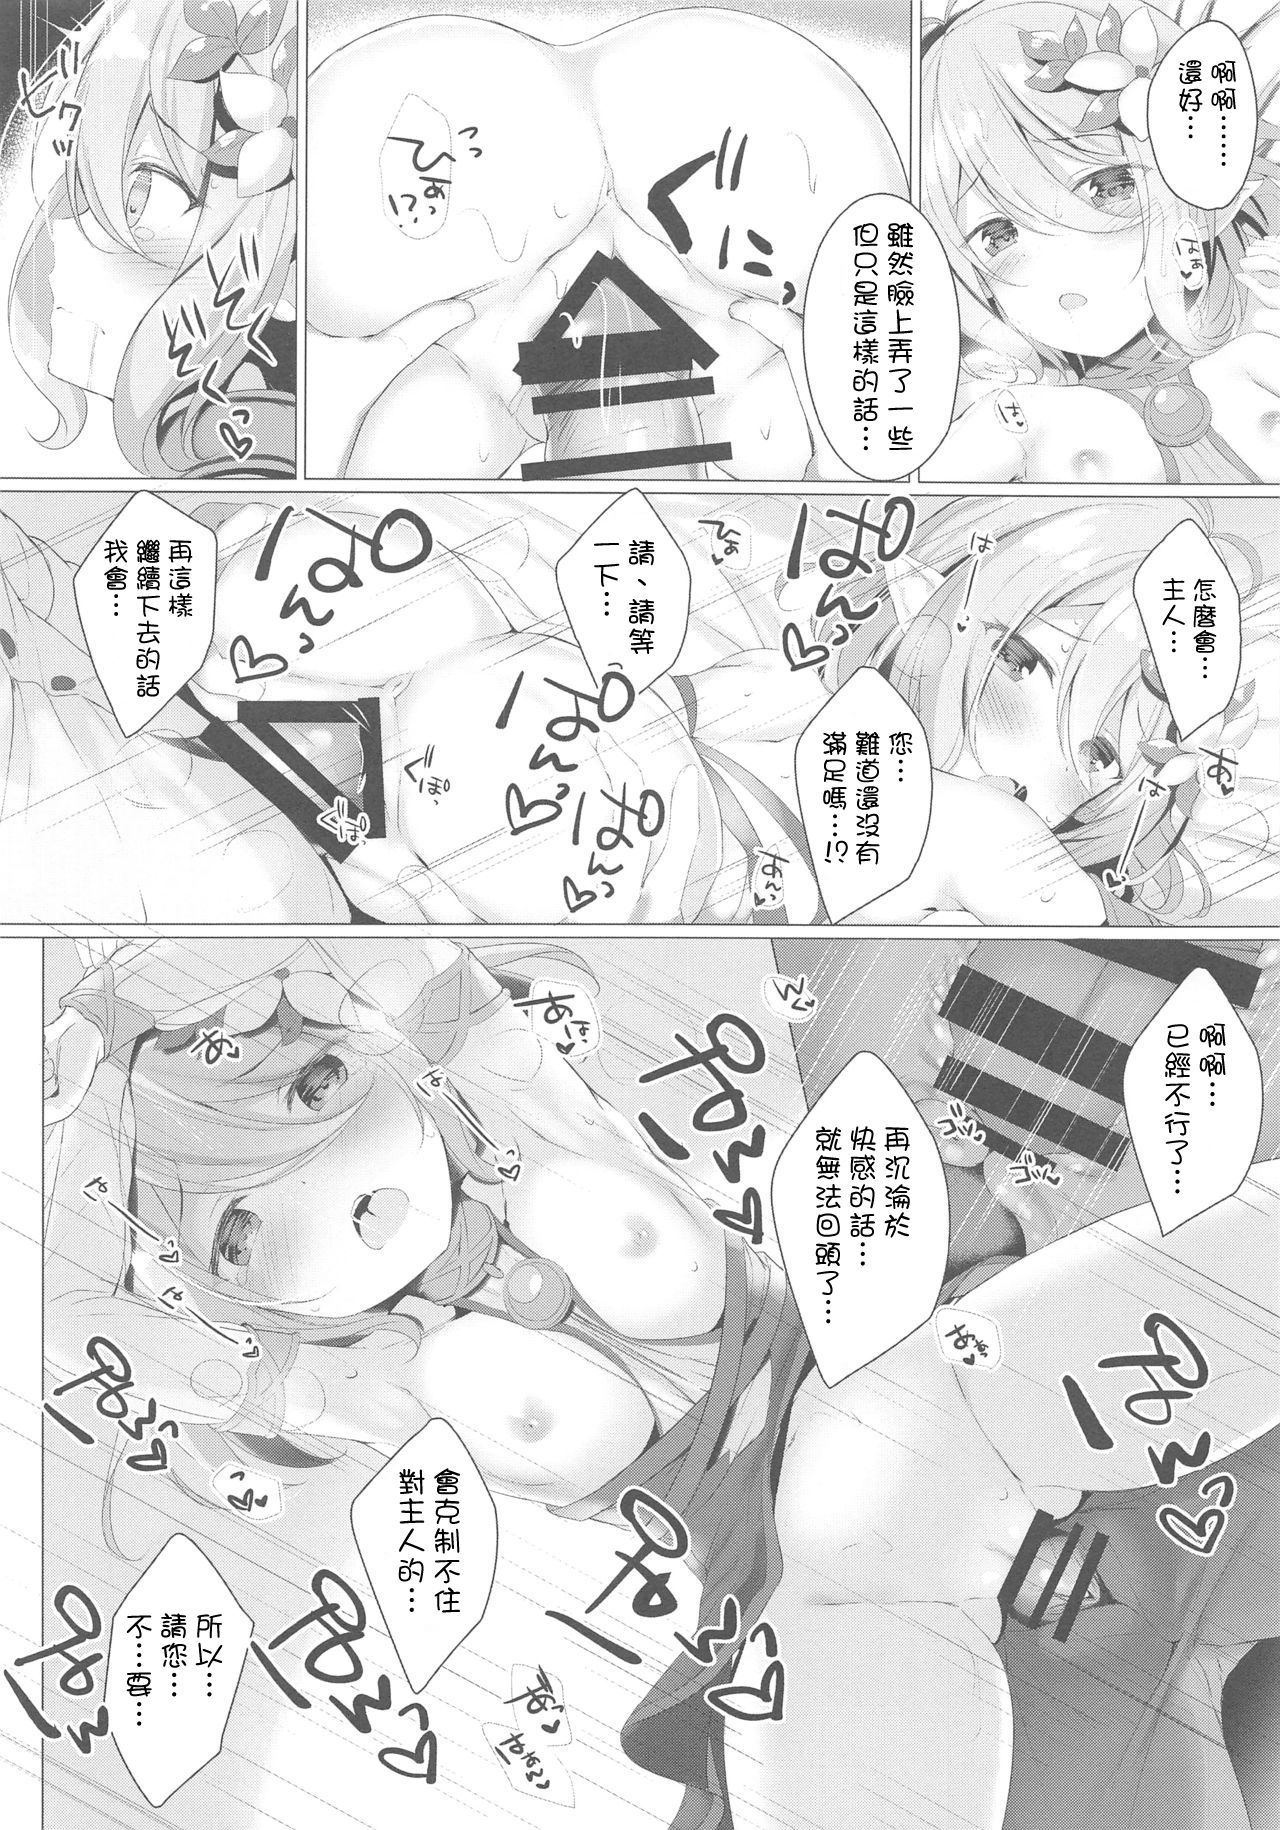 (SC2019 Autumn) [Twilight Road (Tomo)] Kokkoro-chan to Connect Shitai! (Princess Connect! Re:Dive) [Chinese] [一色汉化组] page 9 full